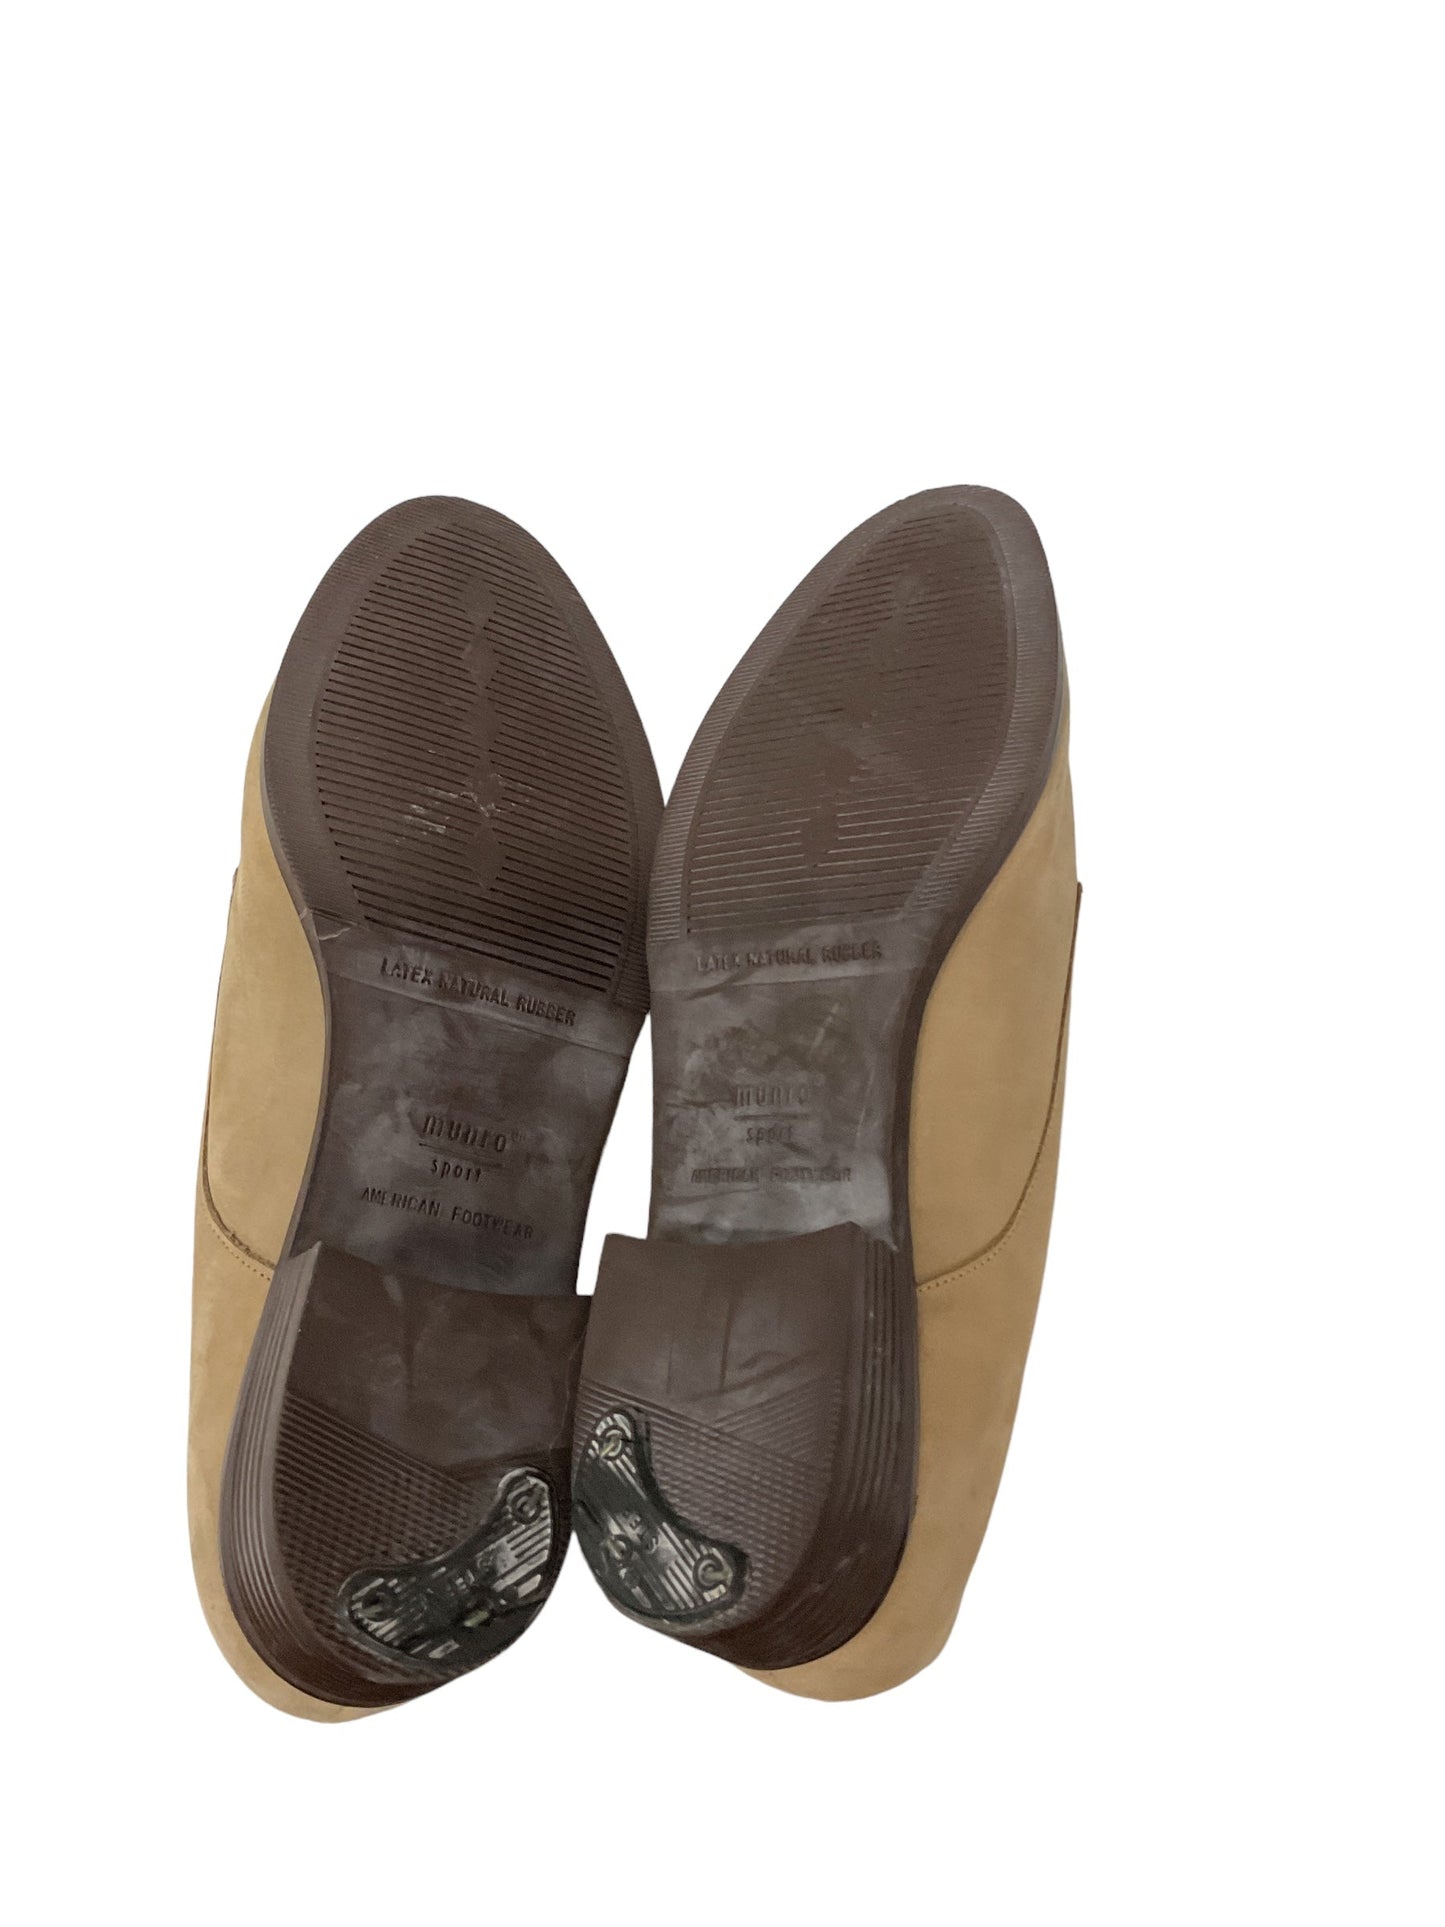 Taupe Shoes Flats Munro, Size 8.5